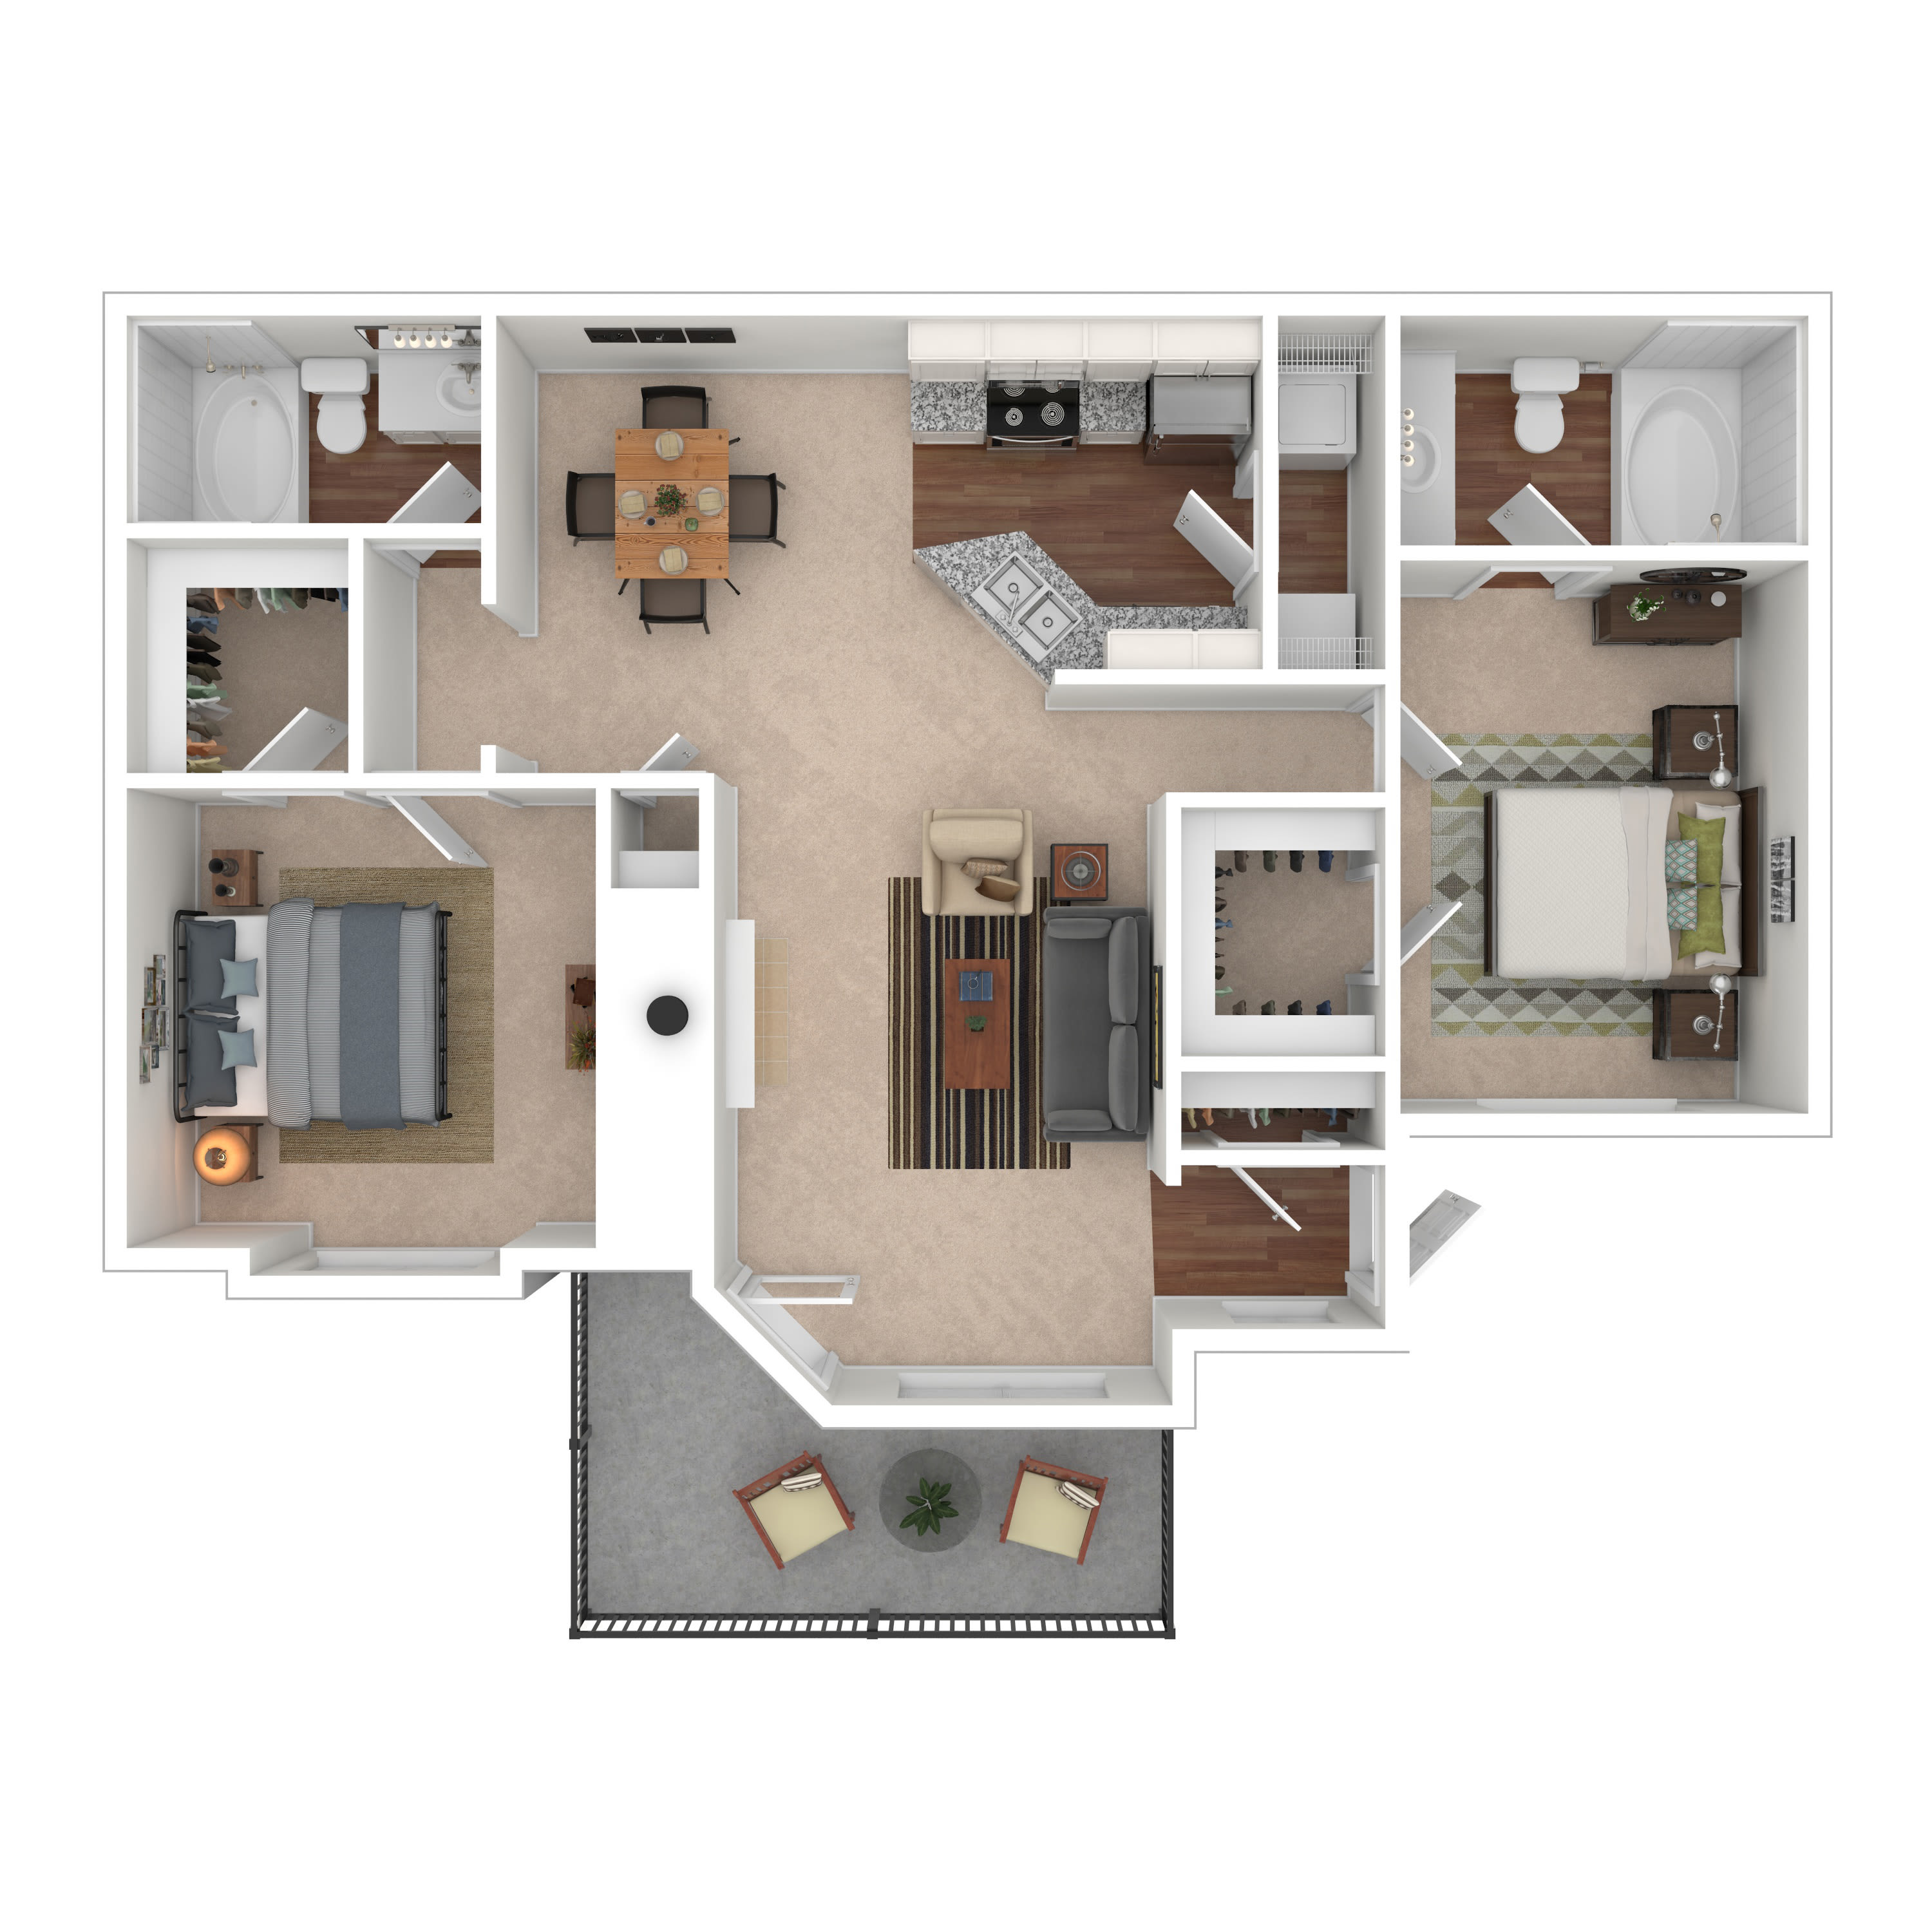 2A | 2 Bed/2 Bath | 1,140 SQFT. floor plan image at Marquis on Edwards Mill